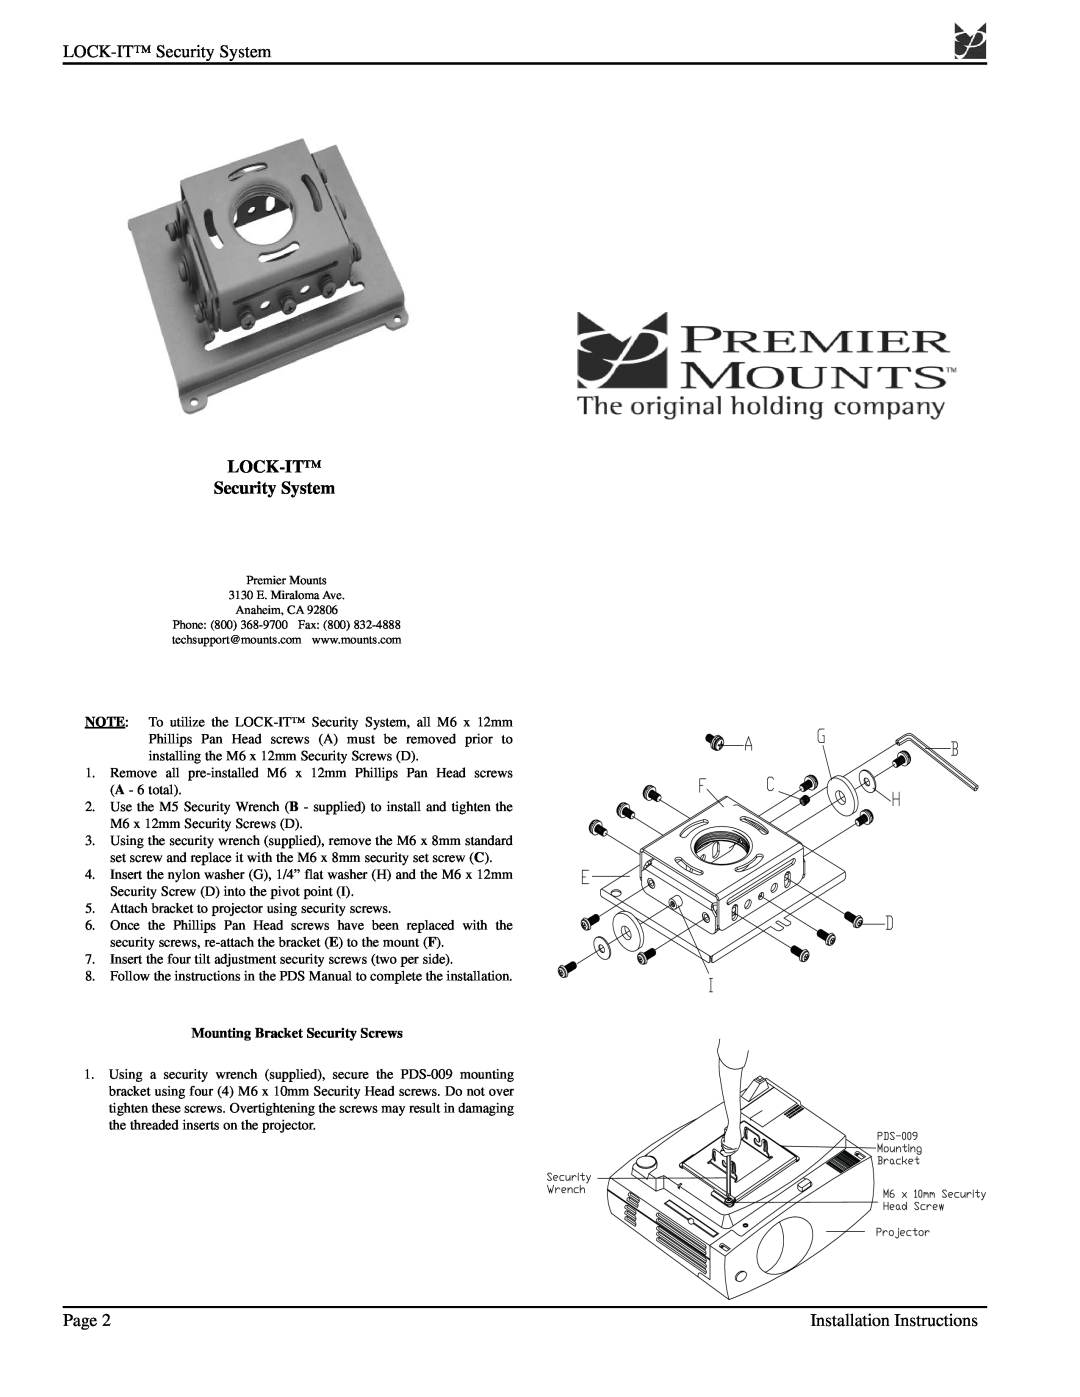 Premier Mounts PDS-009 LOCK-IT Security System, Page, Installation Instructions, Mounting Bracket Security Screws 